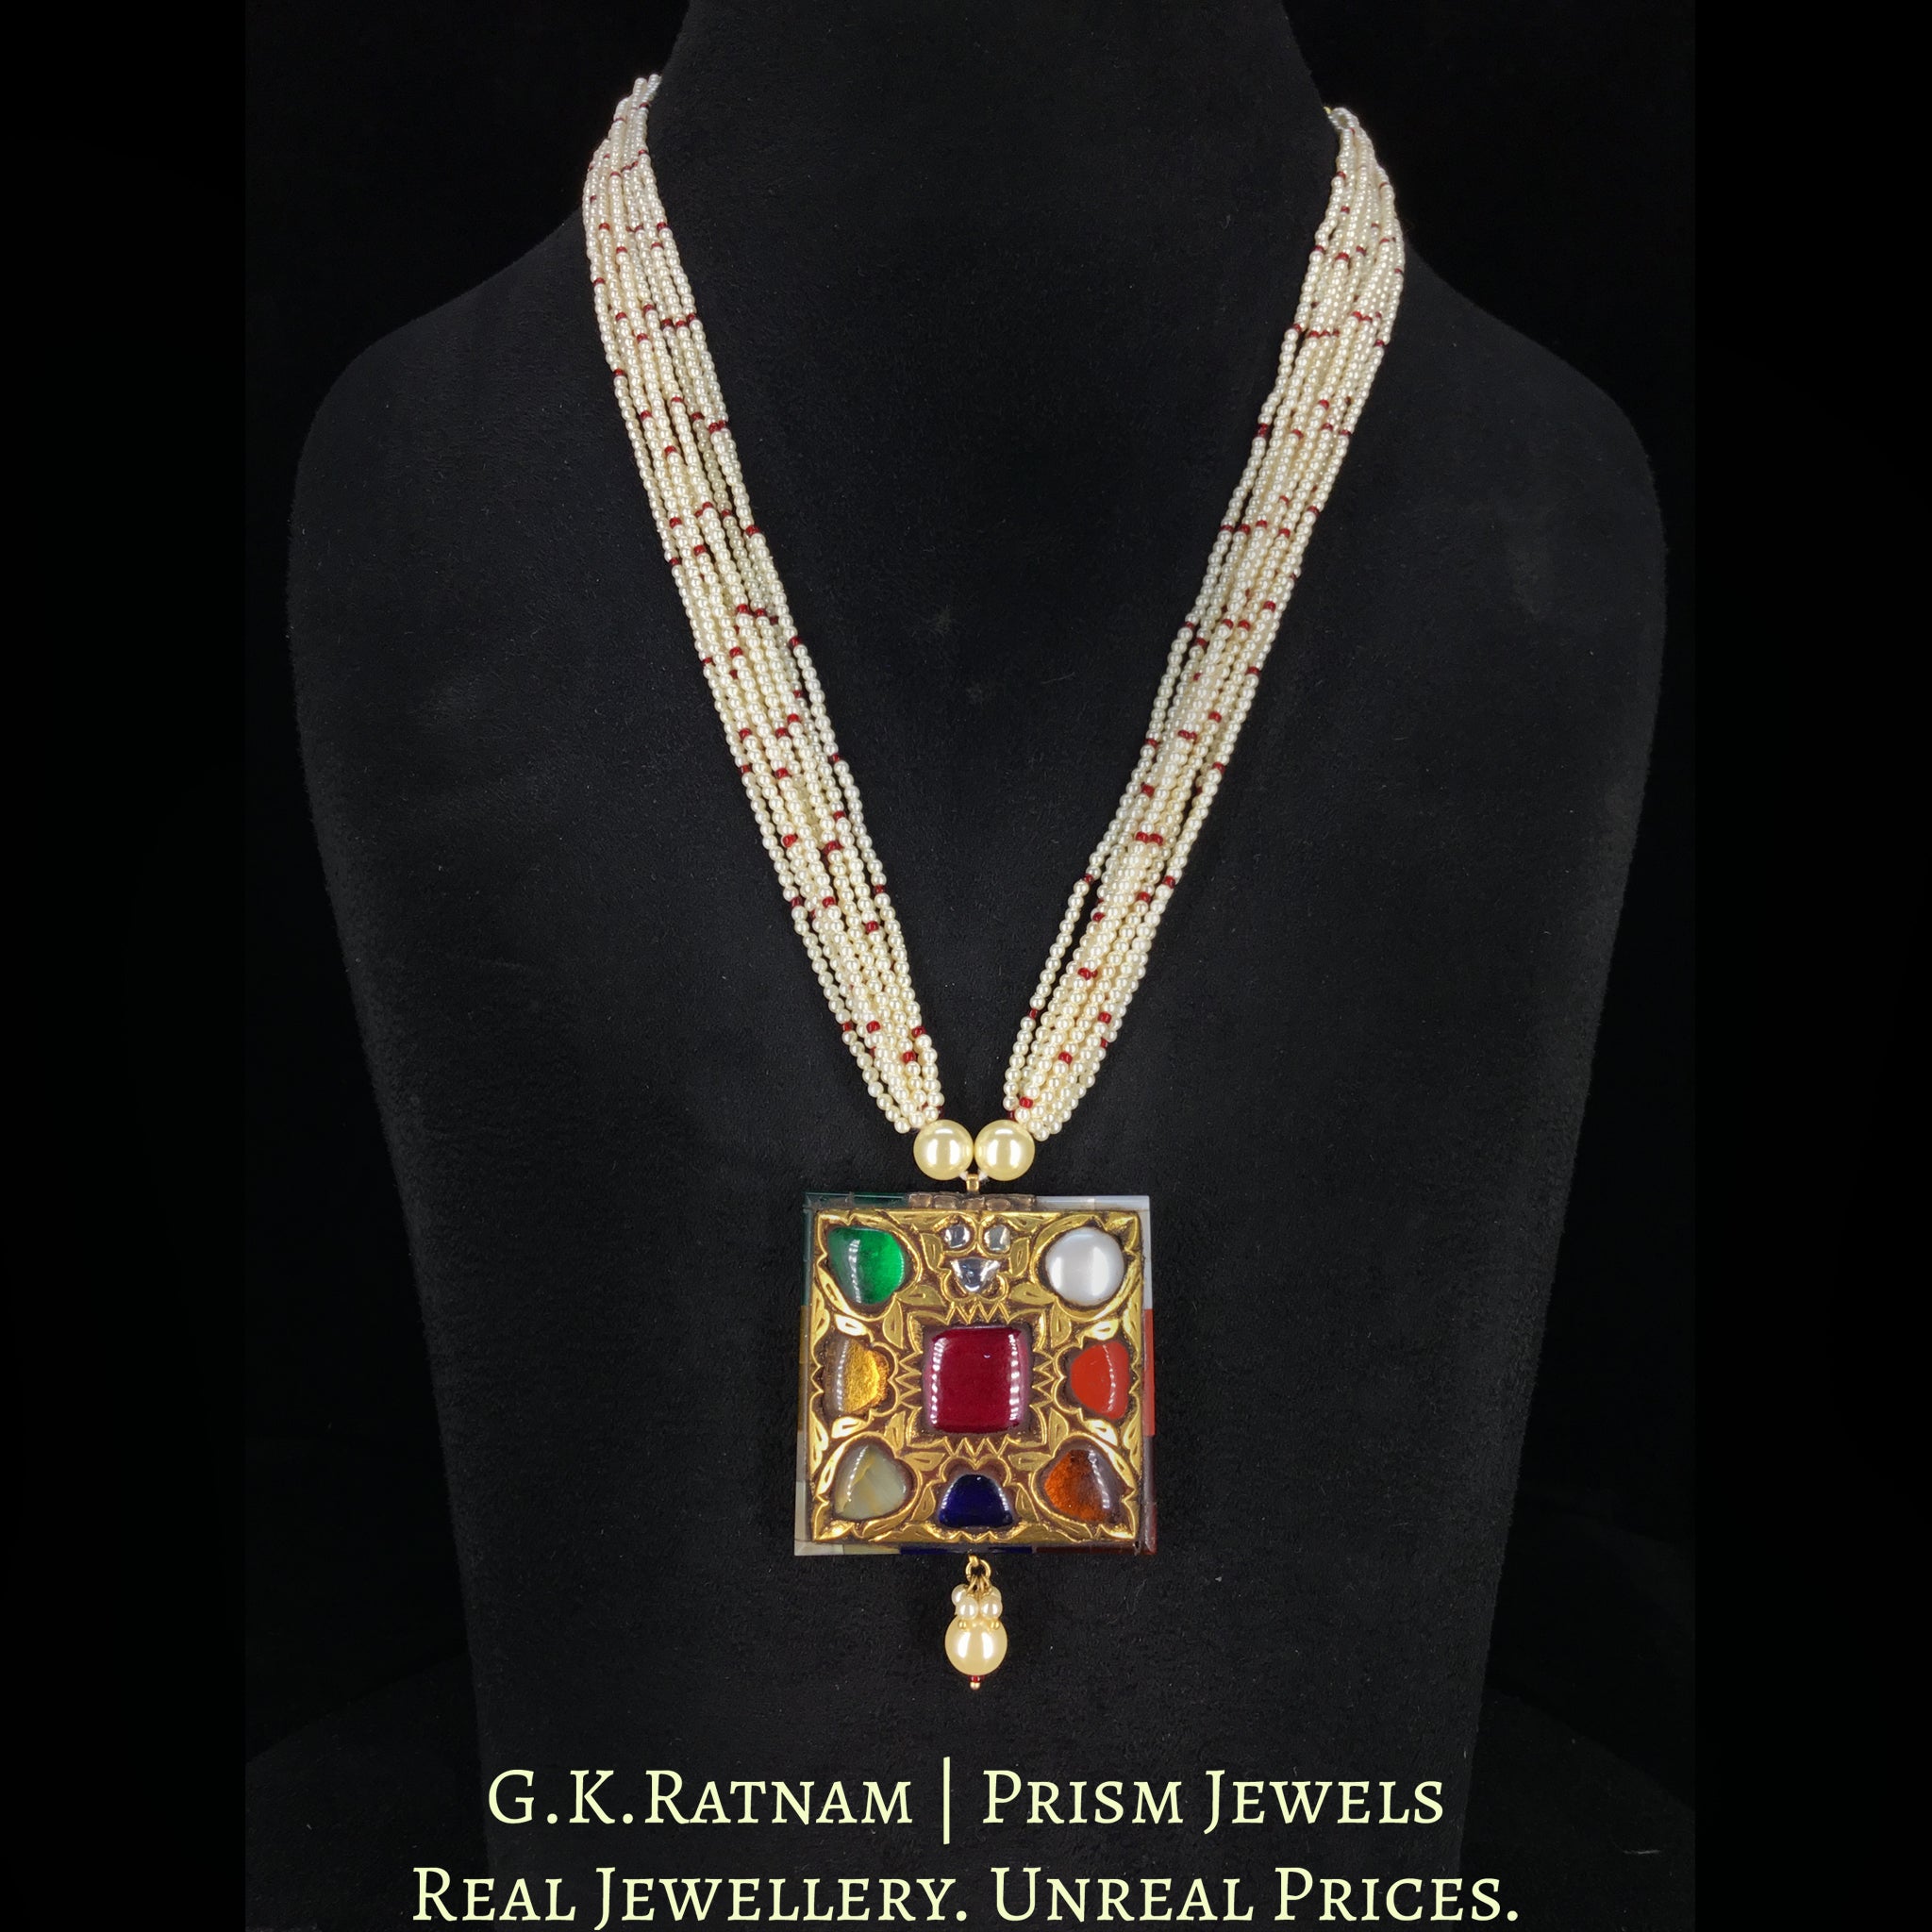 23k Gold and Diamond Polki Navratan Pendant strung in lustrous pearl bunches with a hint of red